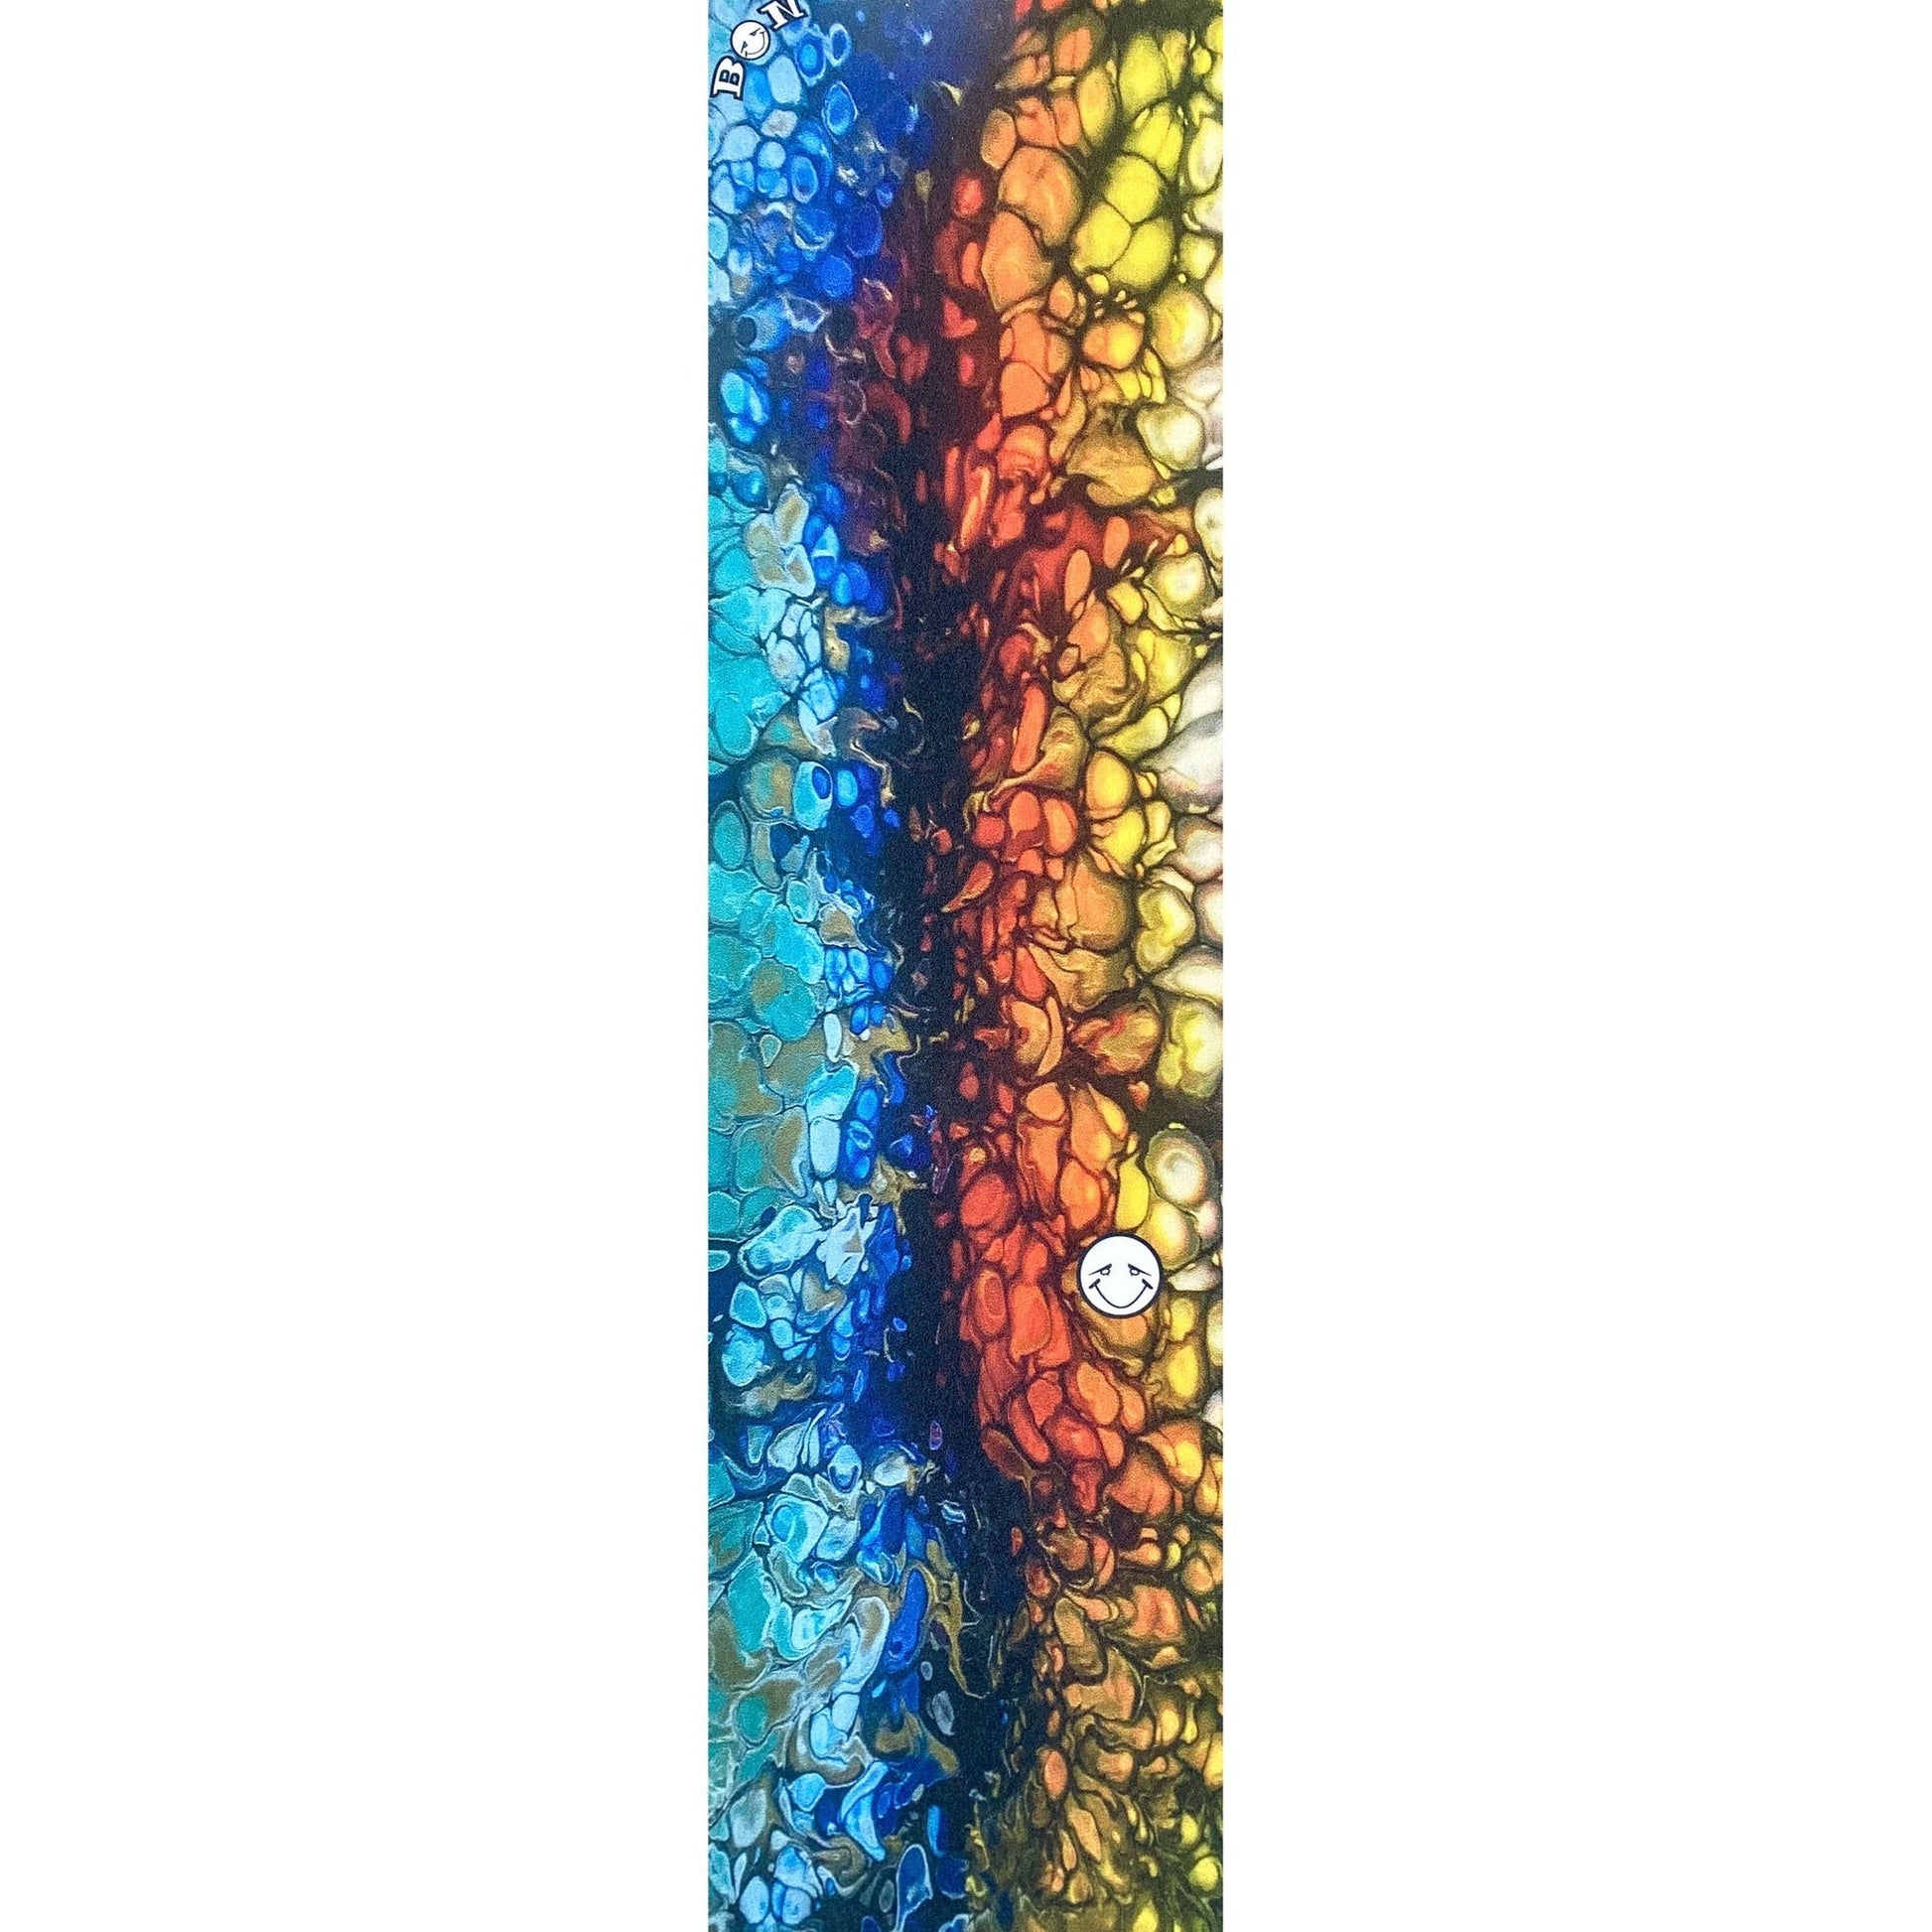 Bon Grip Fire and Ice Blue Red Yellow Premium 9 inch x 33 inch skateboard grip tape